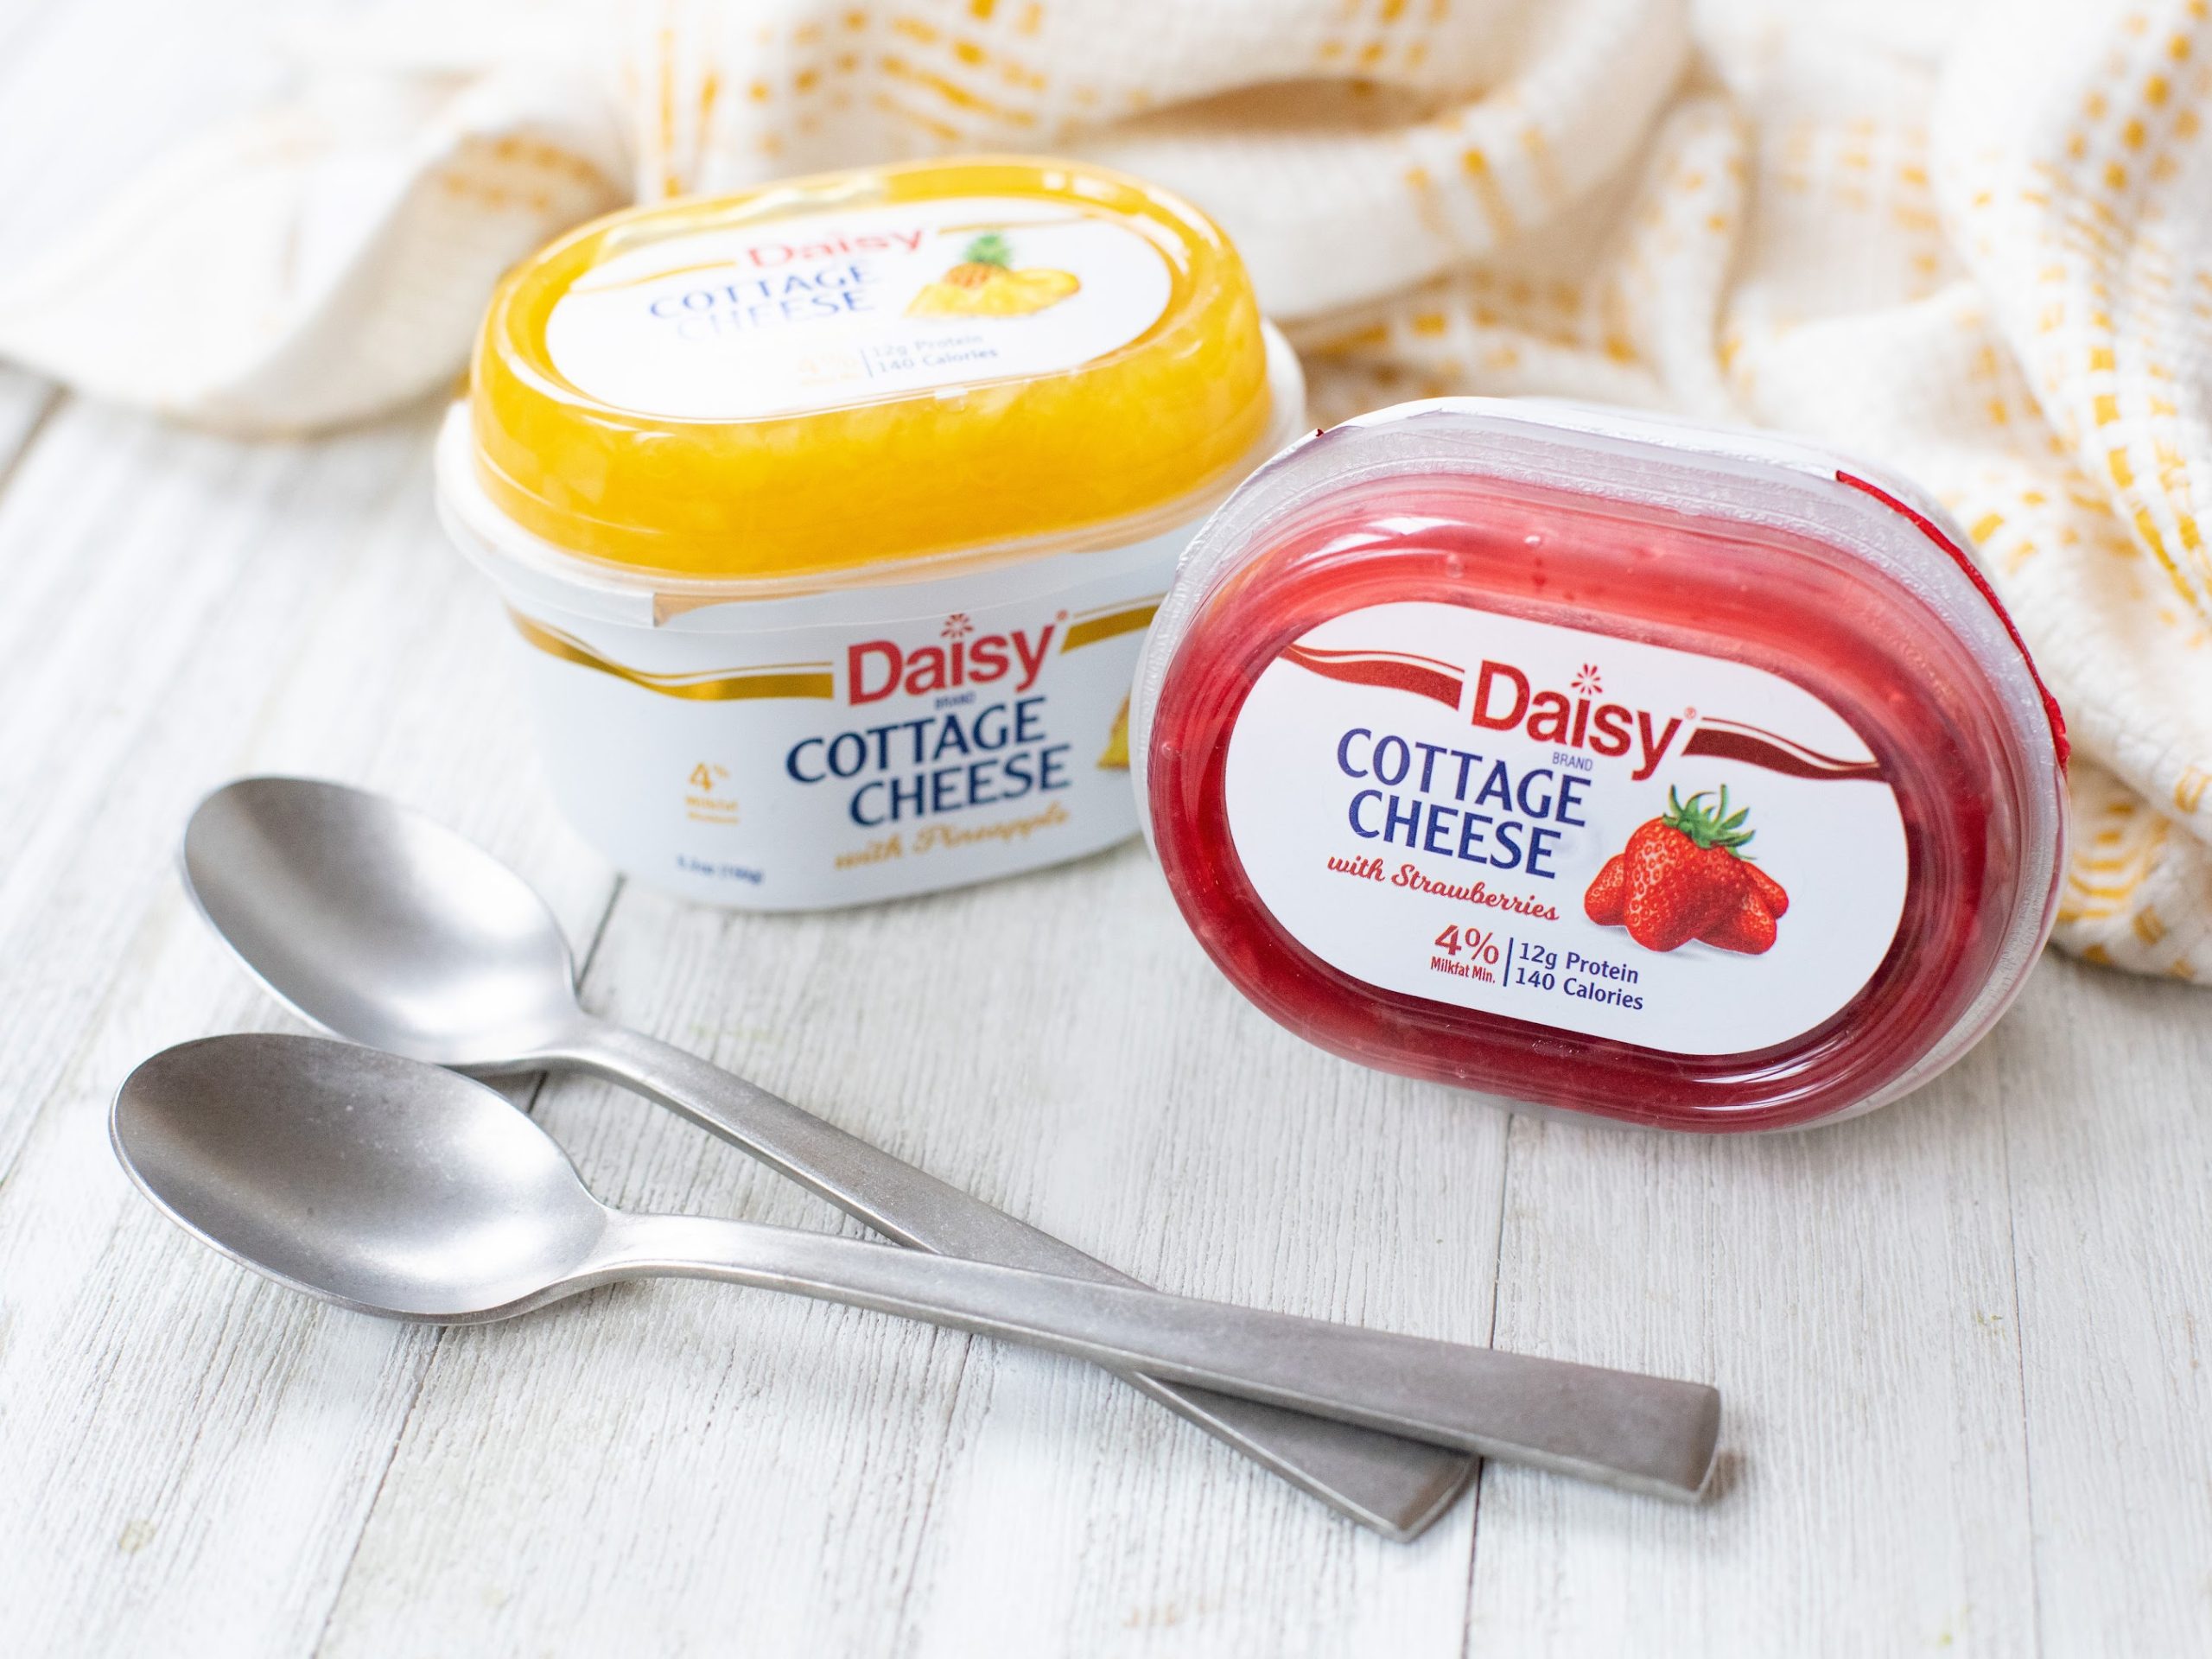 Daisy Cottage Cheese With Fruit Just 95¢ At Publix